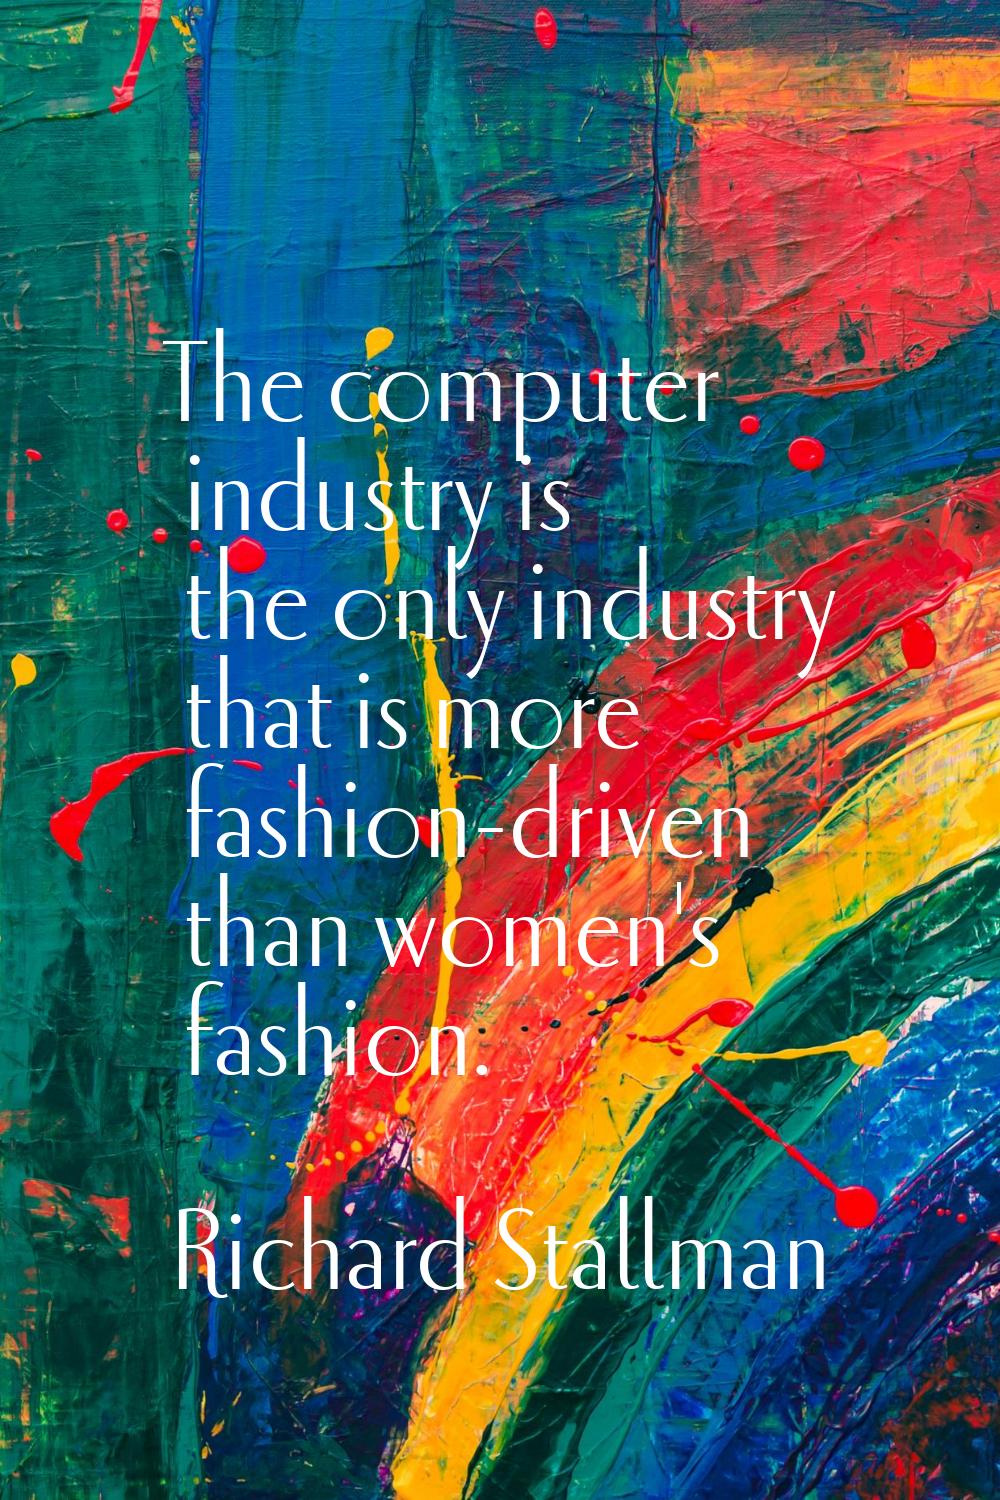 The computer industry is the only industry that is more fashion-driven than women's fashion.